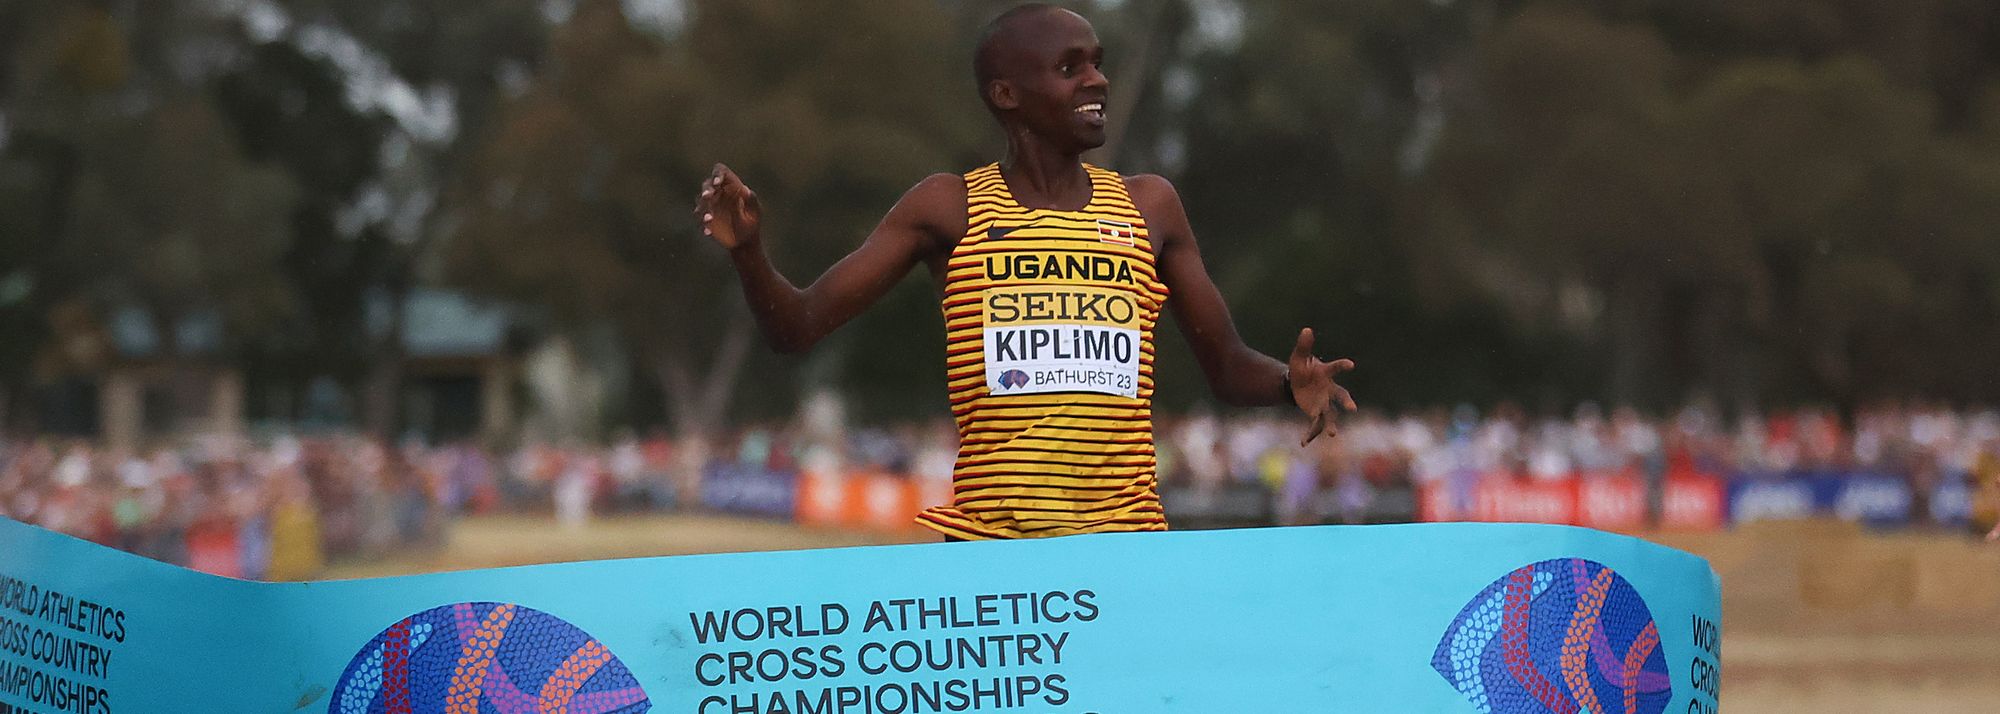 The senior men’s world cross-country title remained with Uganda as Jacob Kiplimo claimed gold